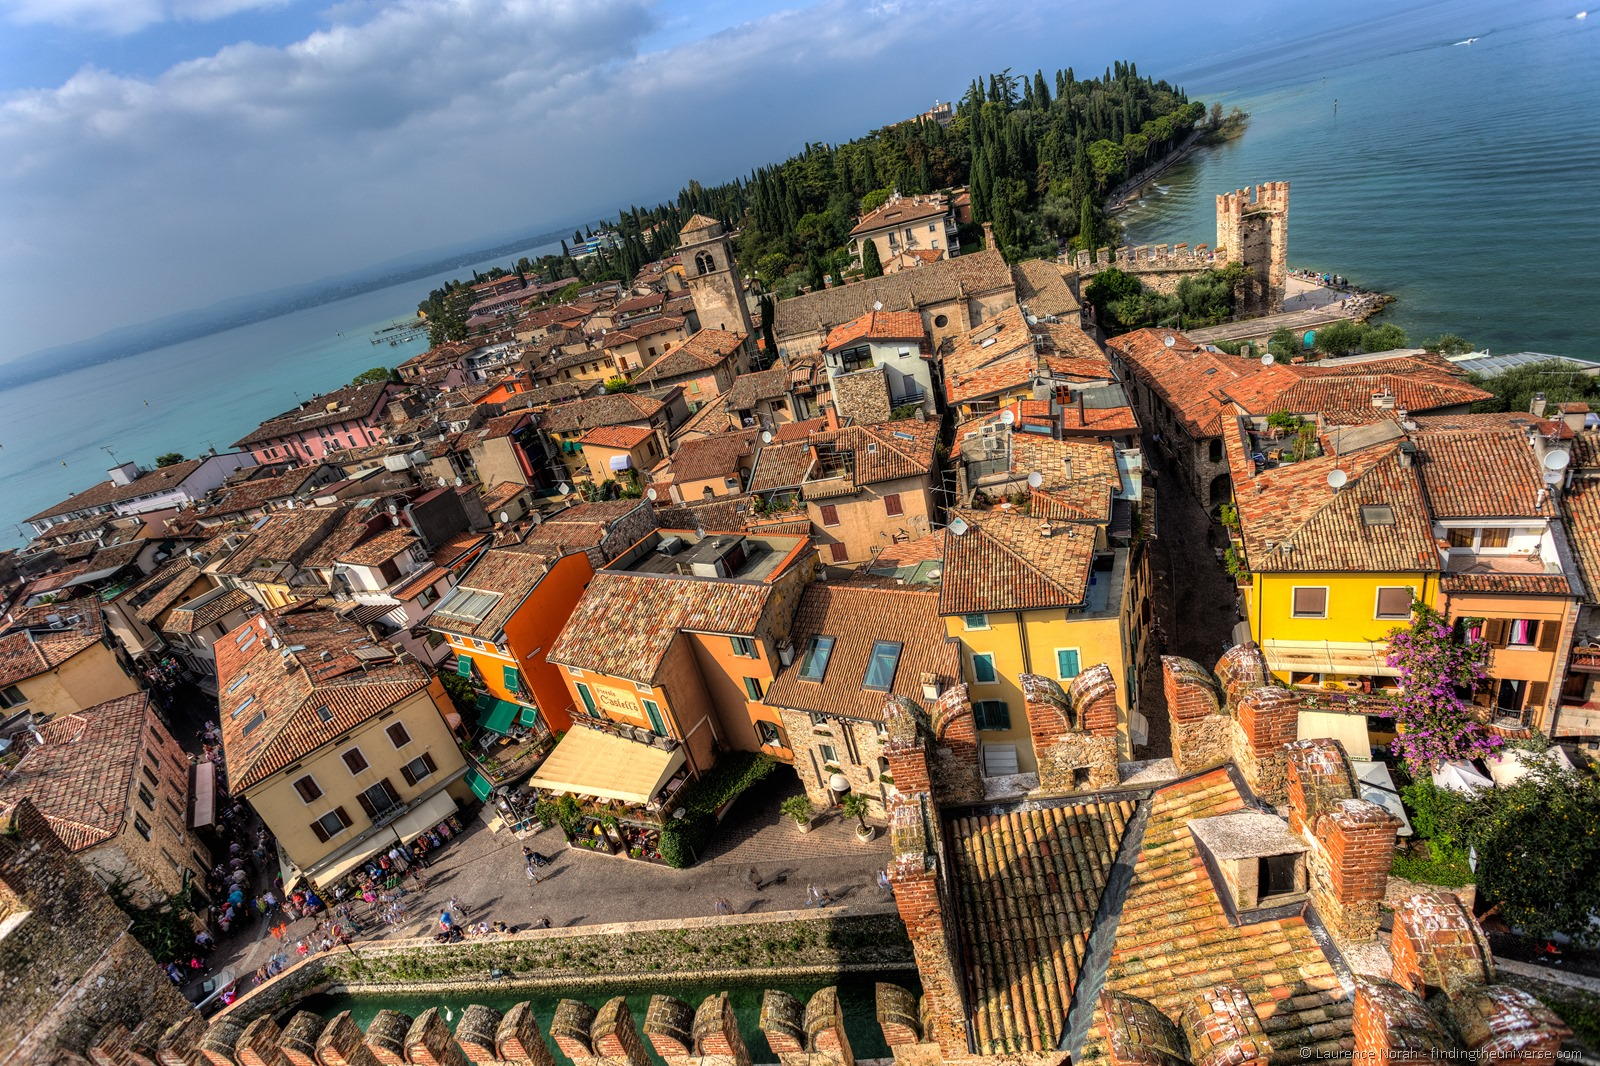 [sirmione%2520view%2520from%2520castle%2520ramparts%2520italy%2520garda%2520lake%255B3%255D.jpg]